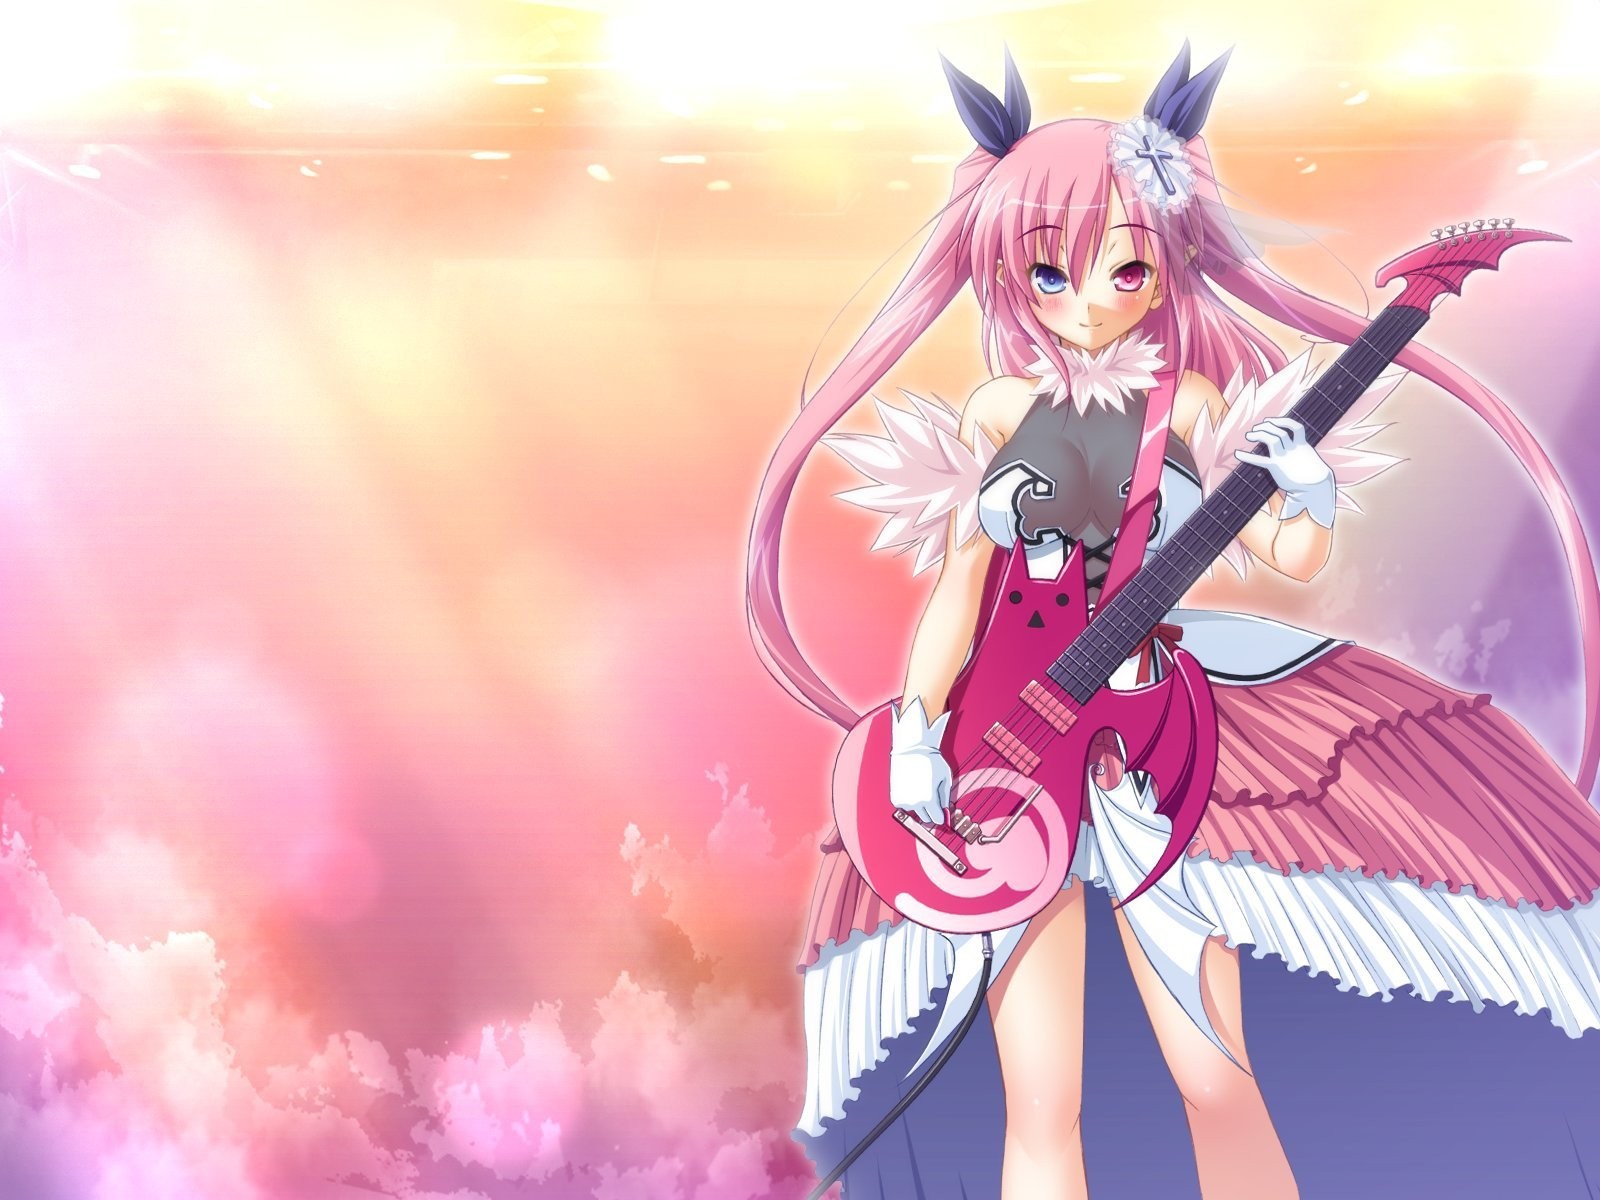 Anime Girl With A Guitar Wallpapers And Images Wallpapers